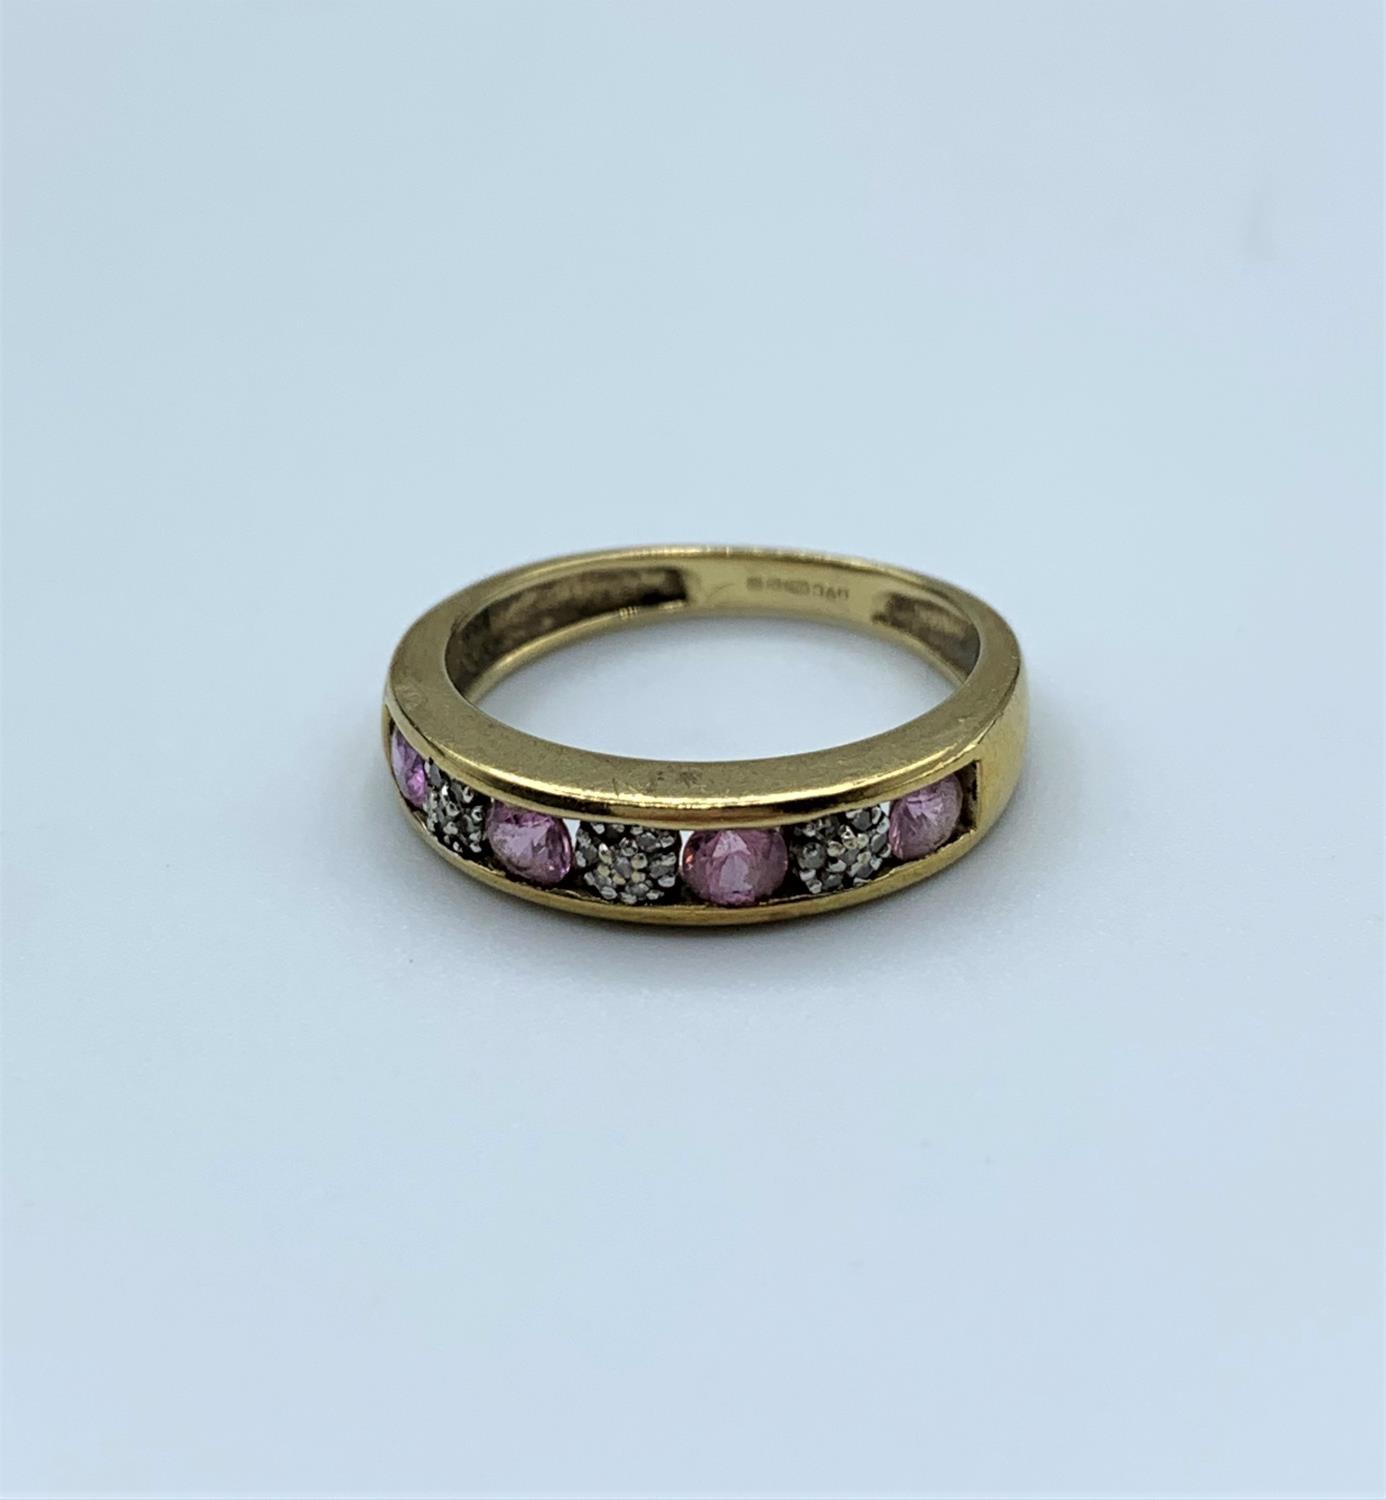 9ct yellow gold ring with pink and white stones, weight 2.4g and size L - Image 2 of 4